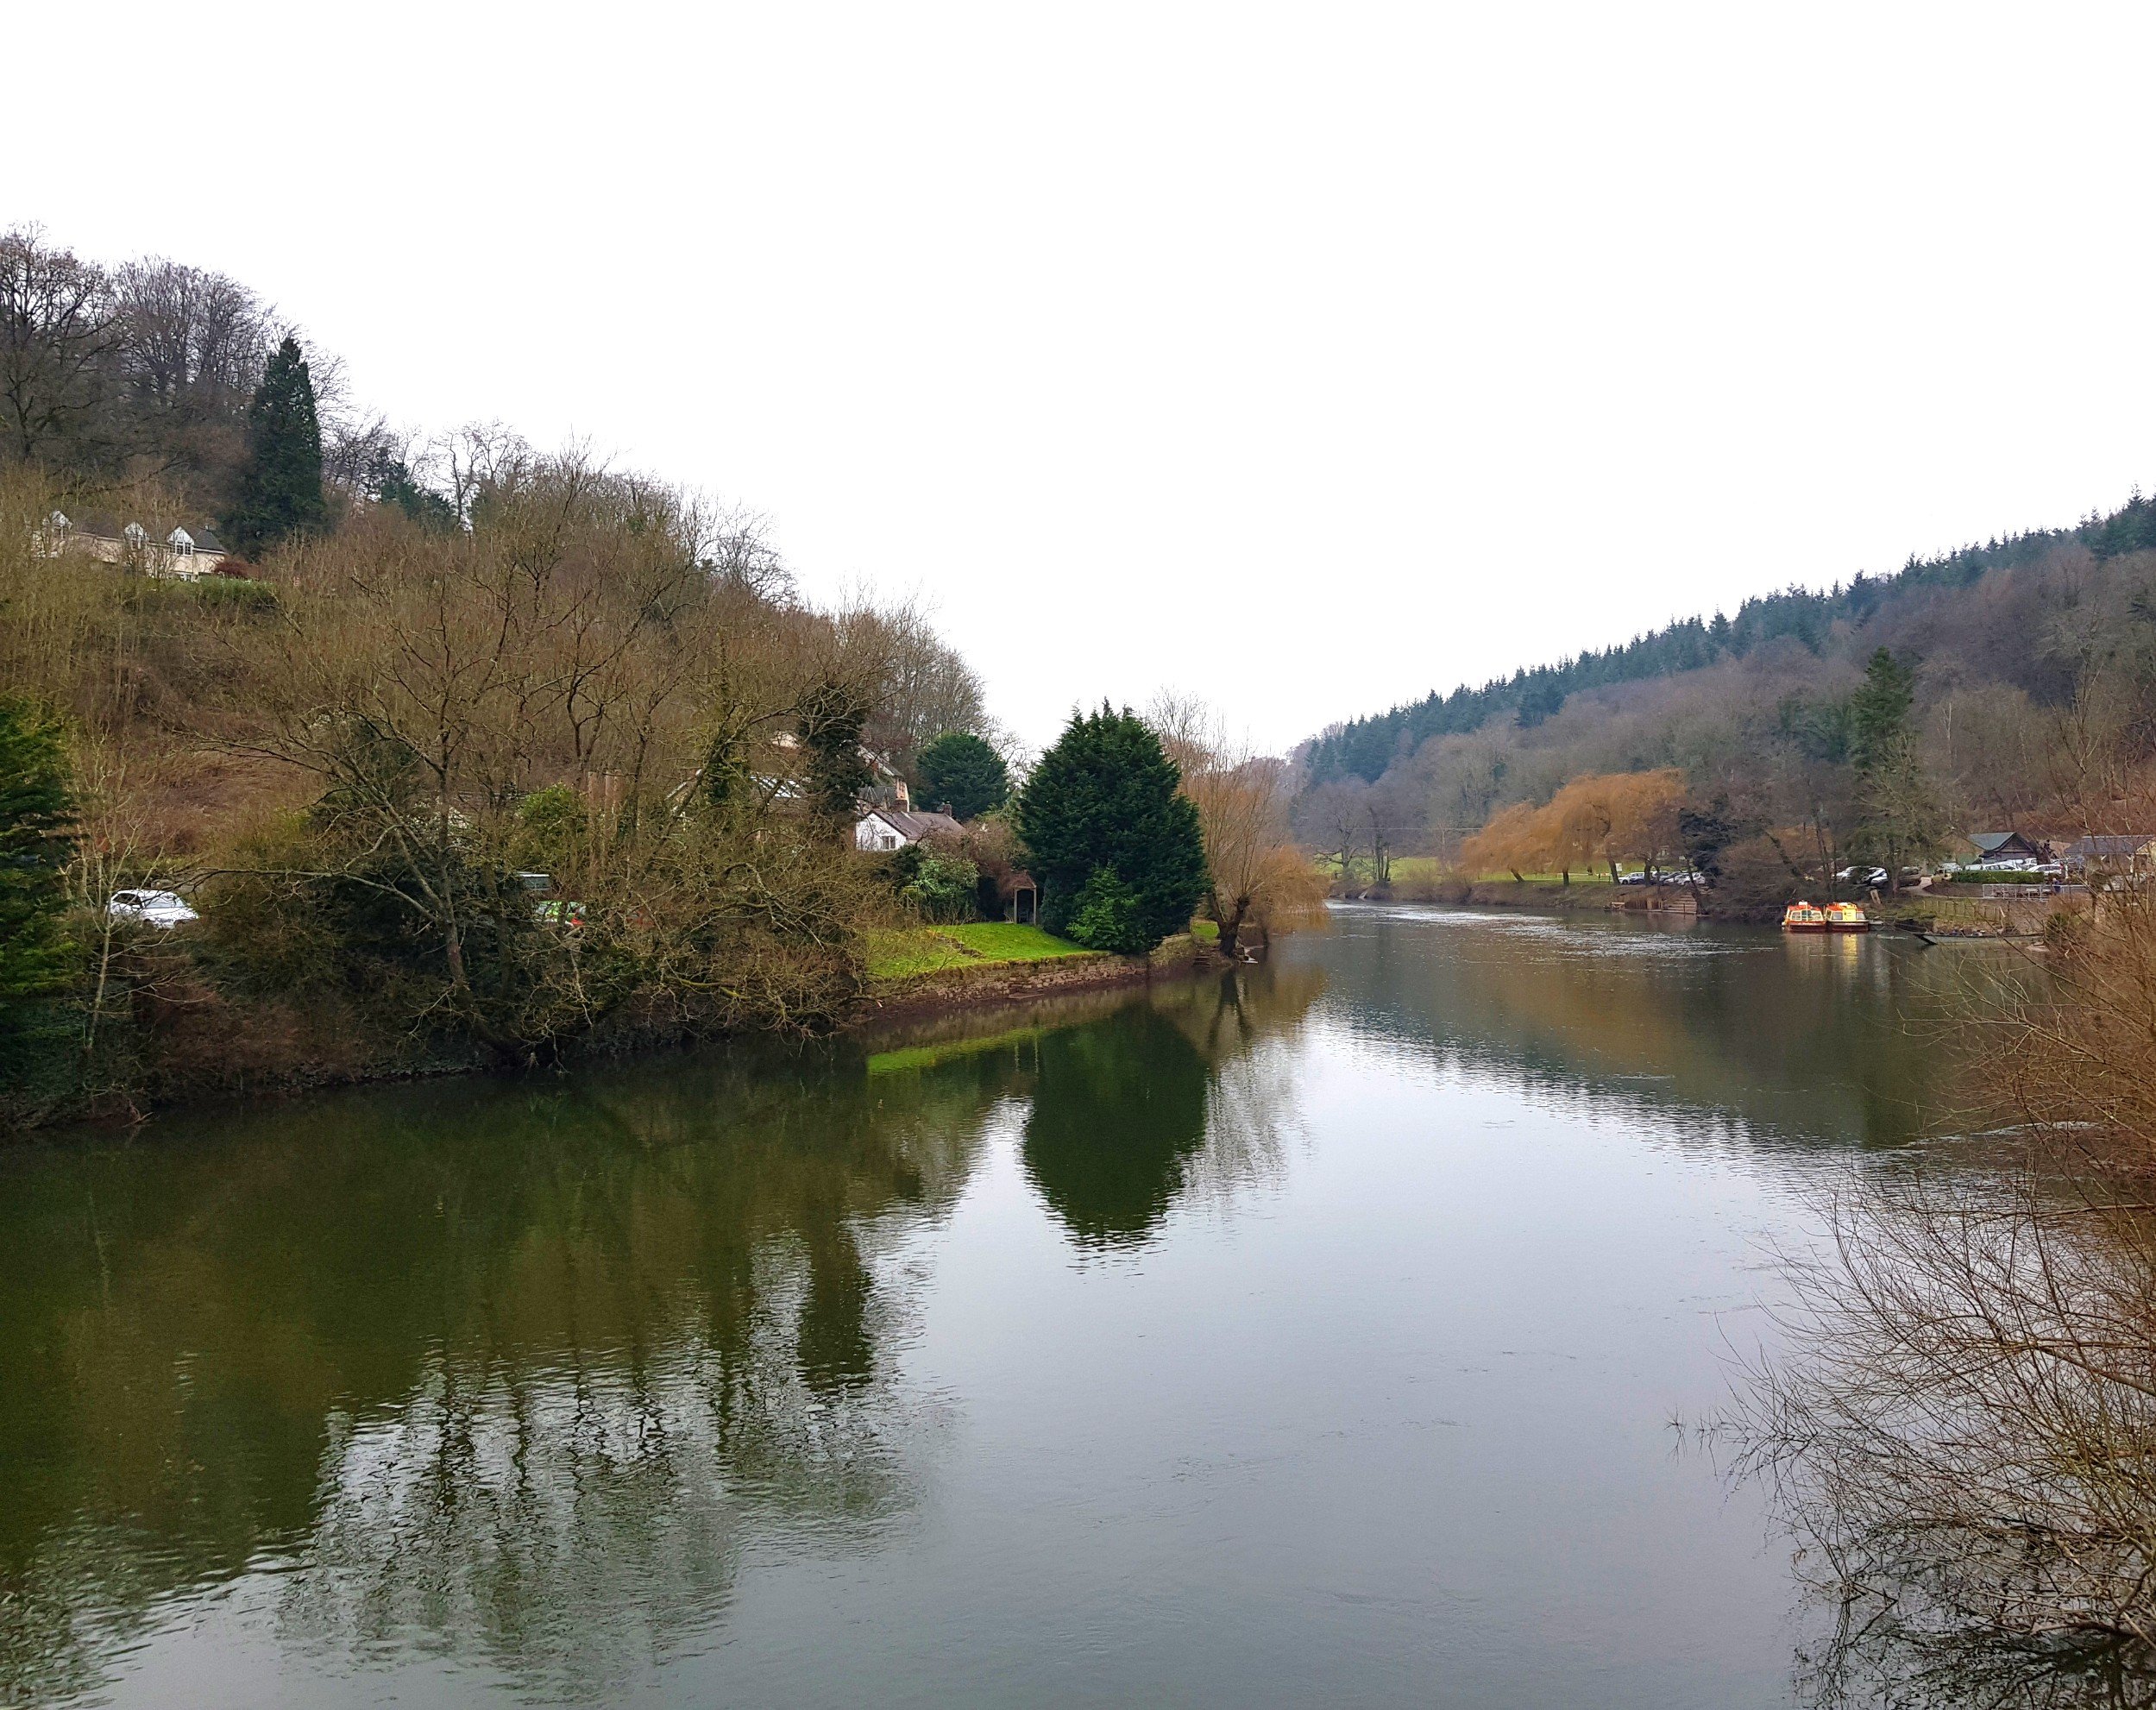 Stunning scenic view of river Wye